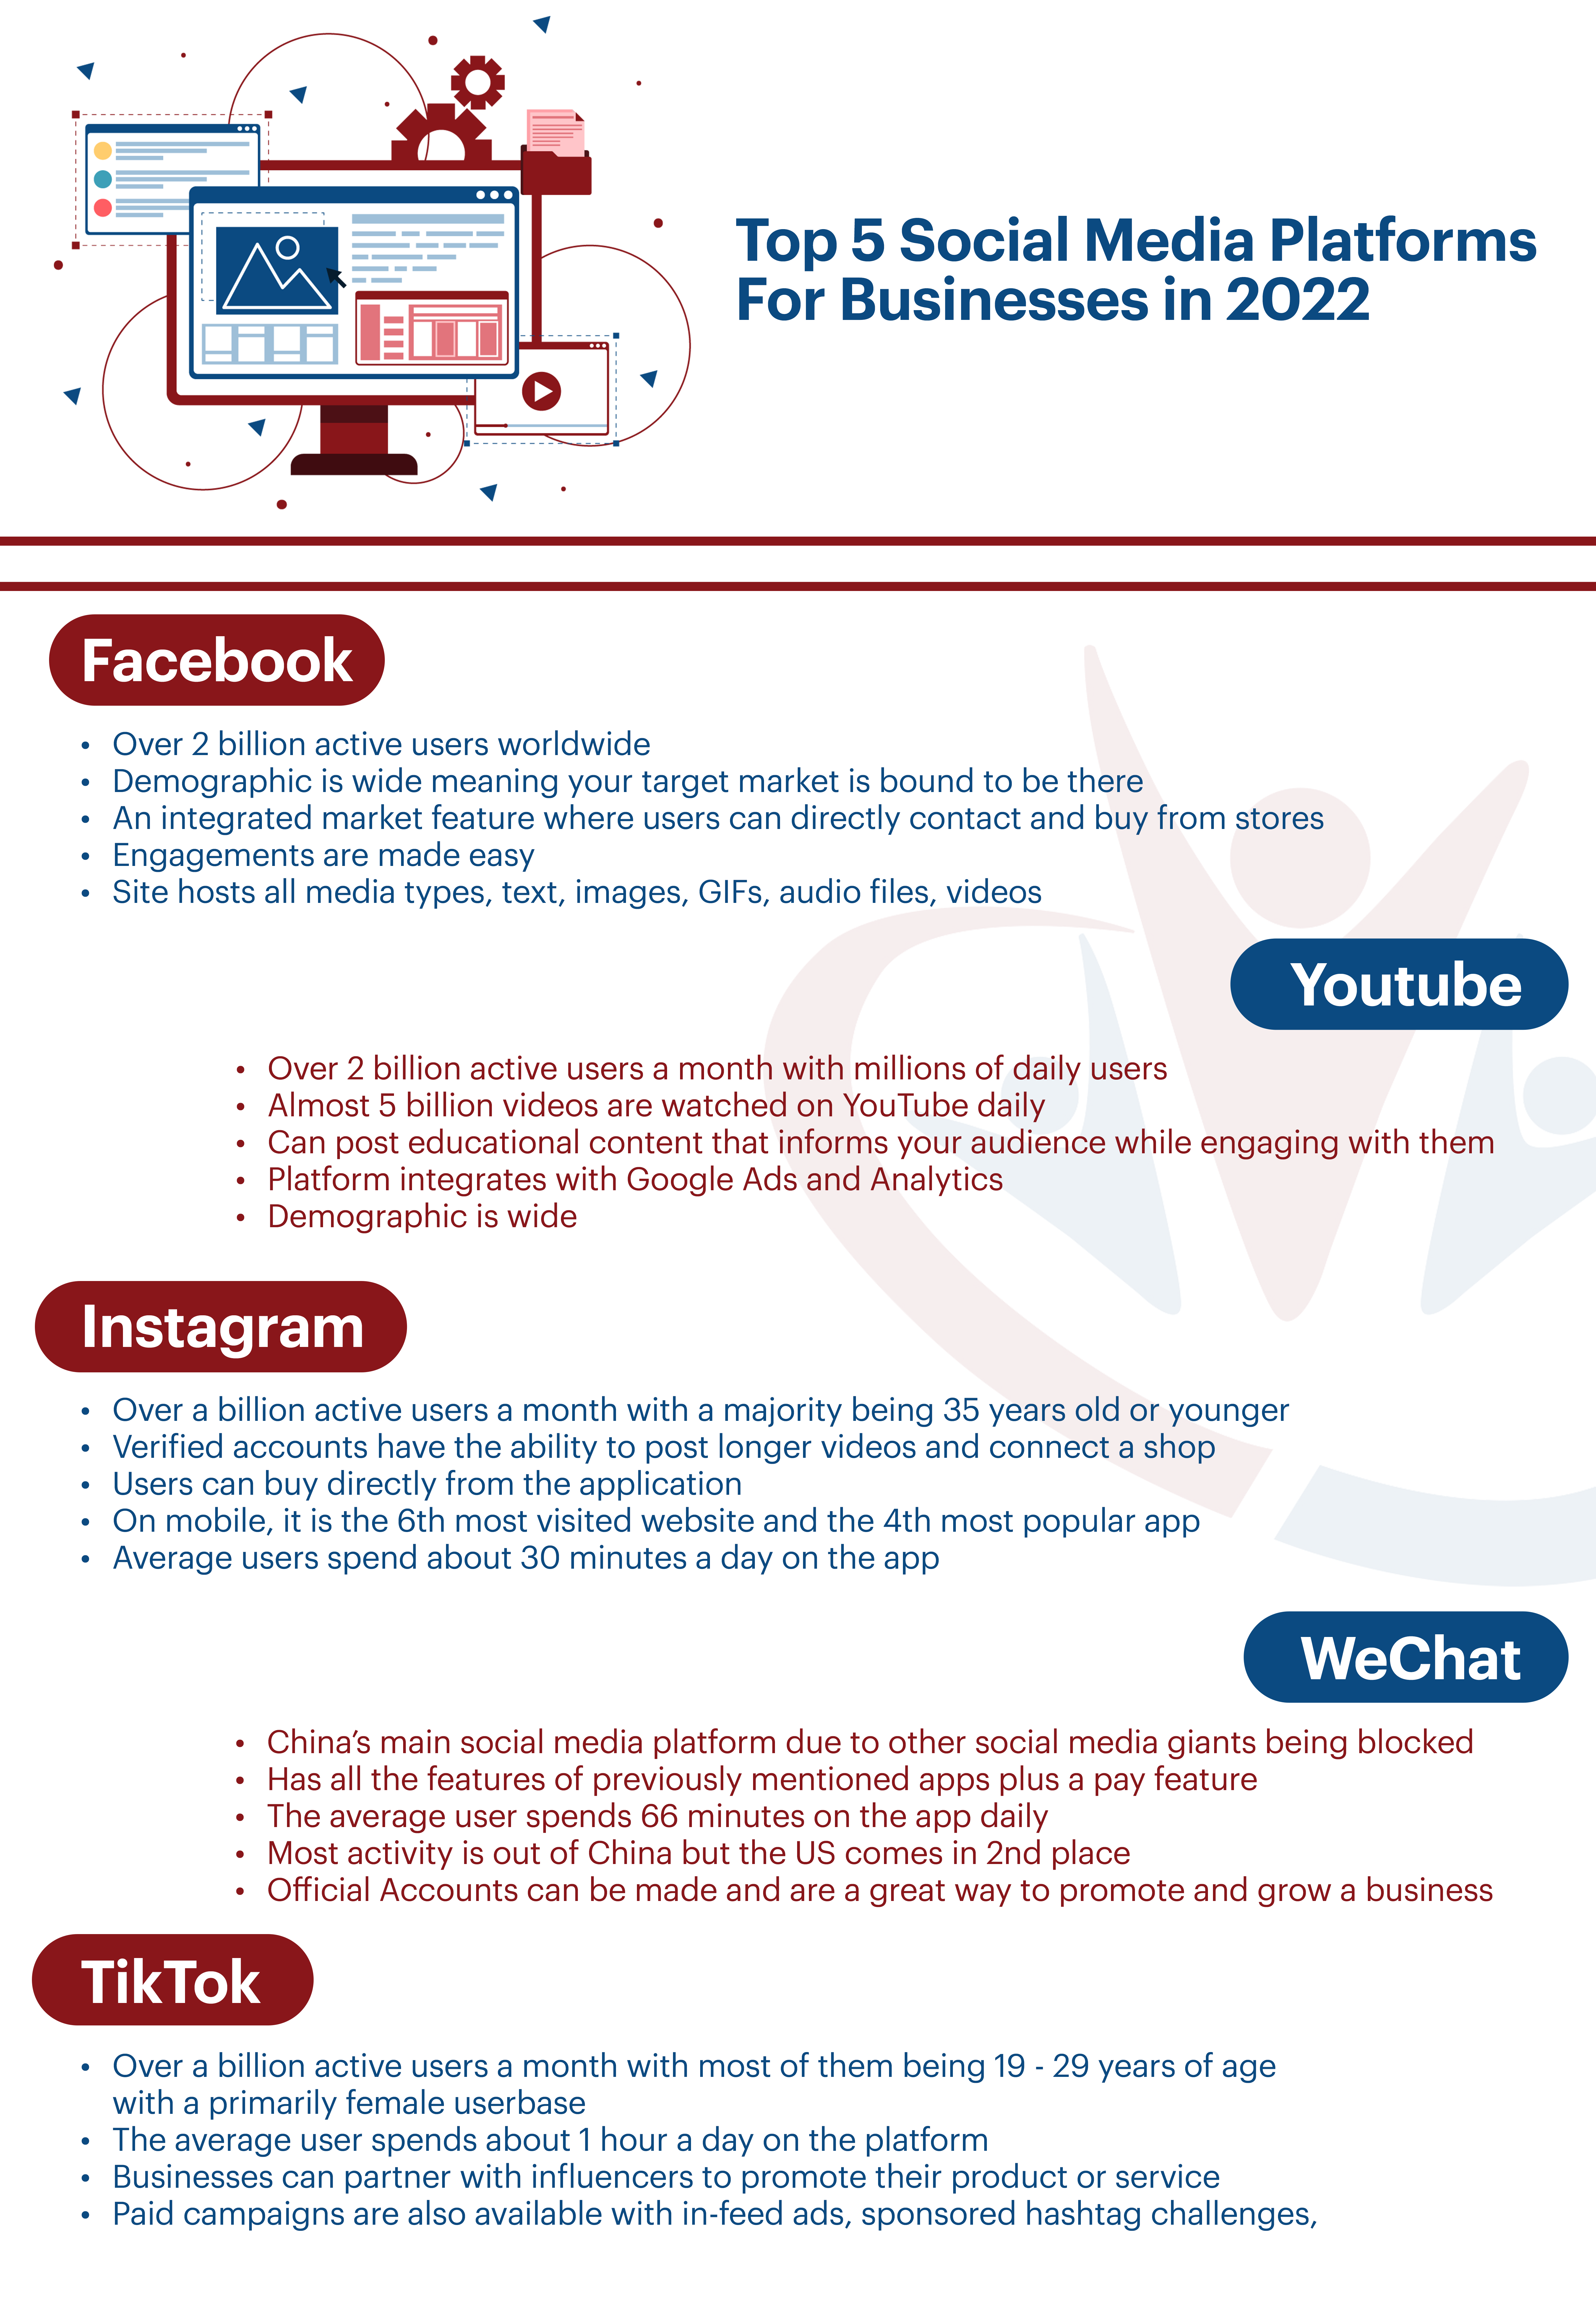 Infographic - Top 5 Social Media Platforms for Businesses in 2022